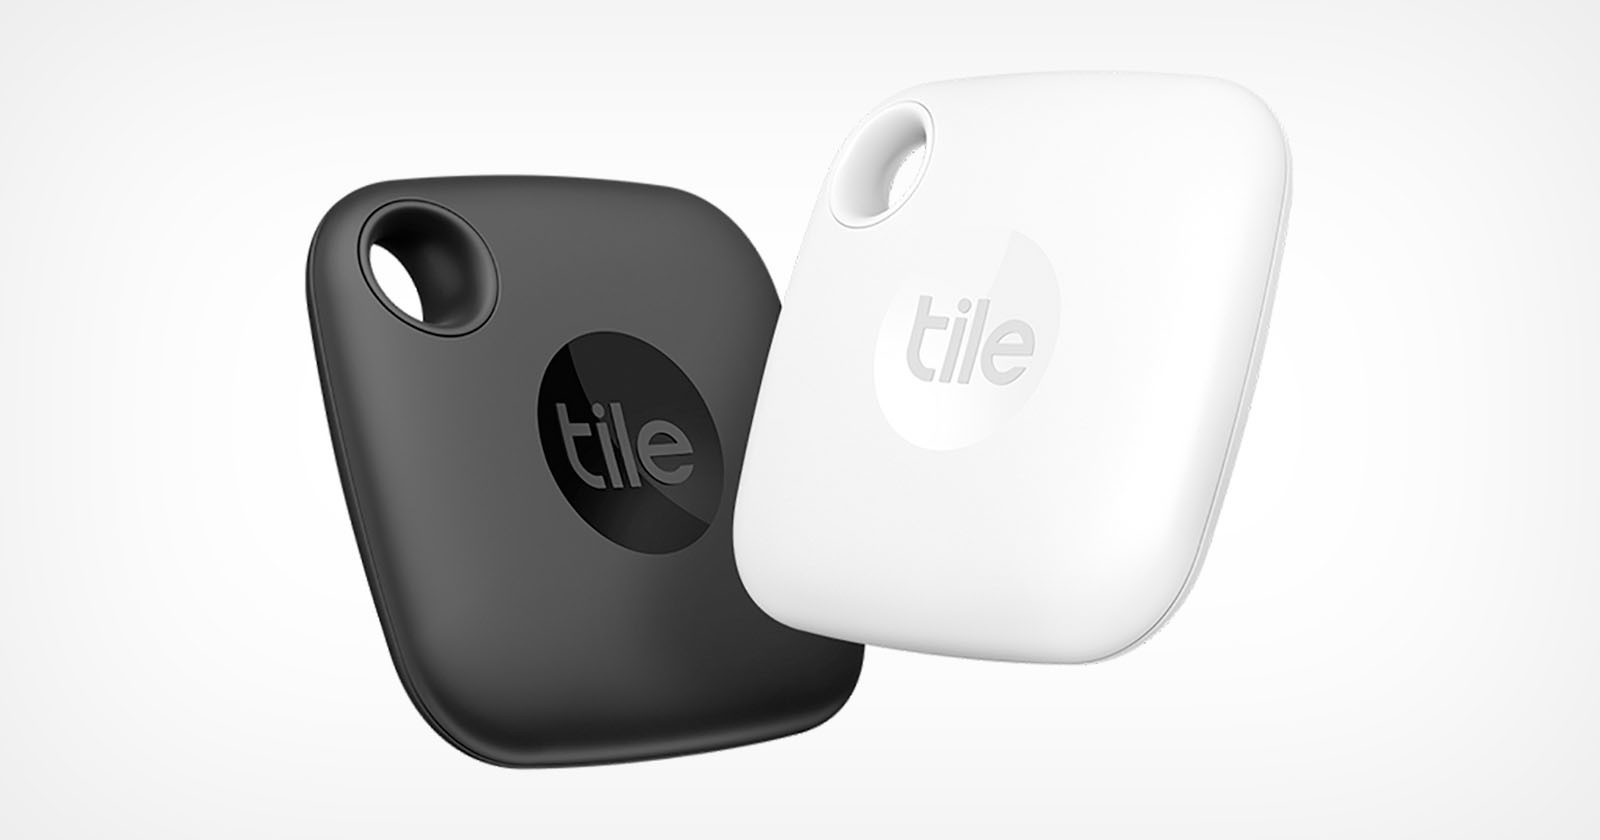 Tile to Fine Users $1M for Tracking People Without Their Permission